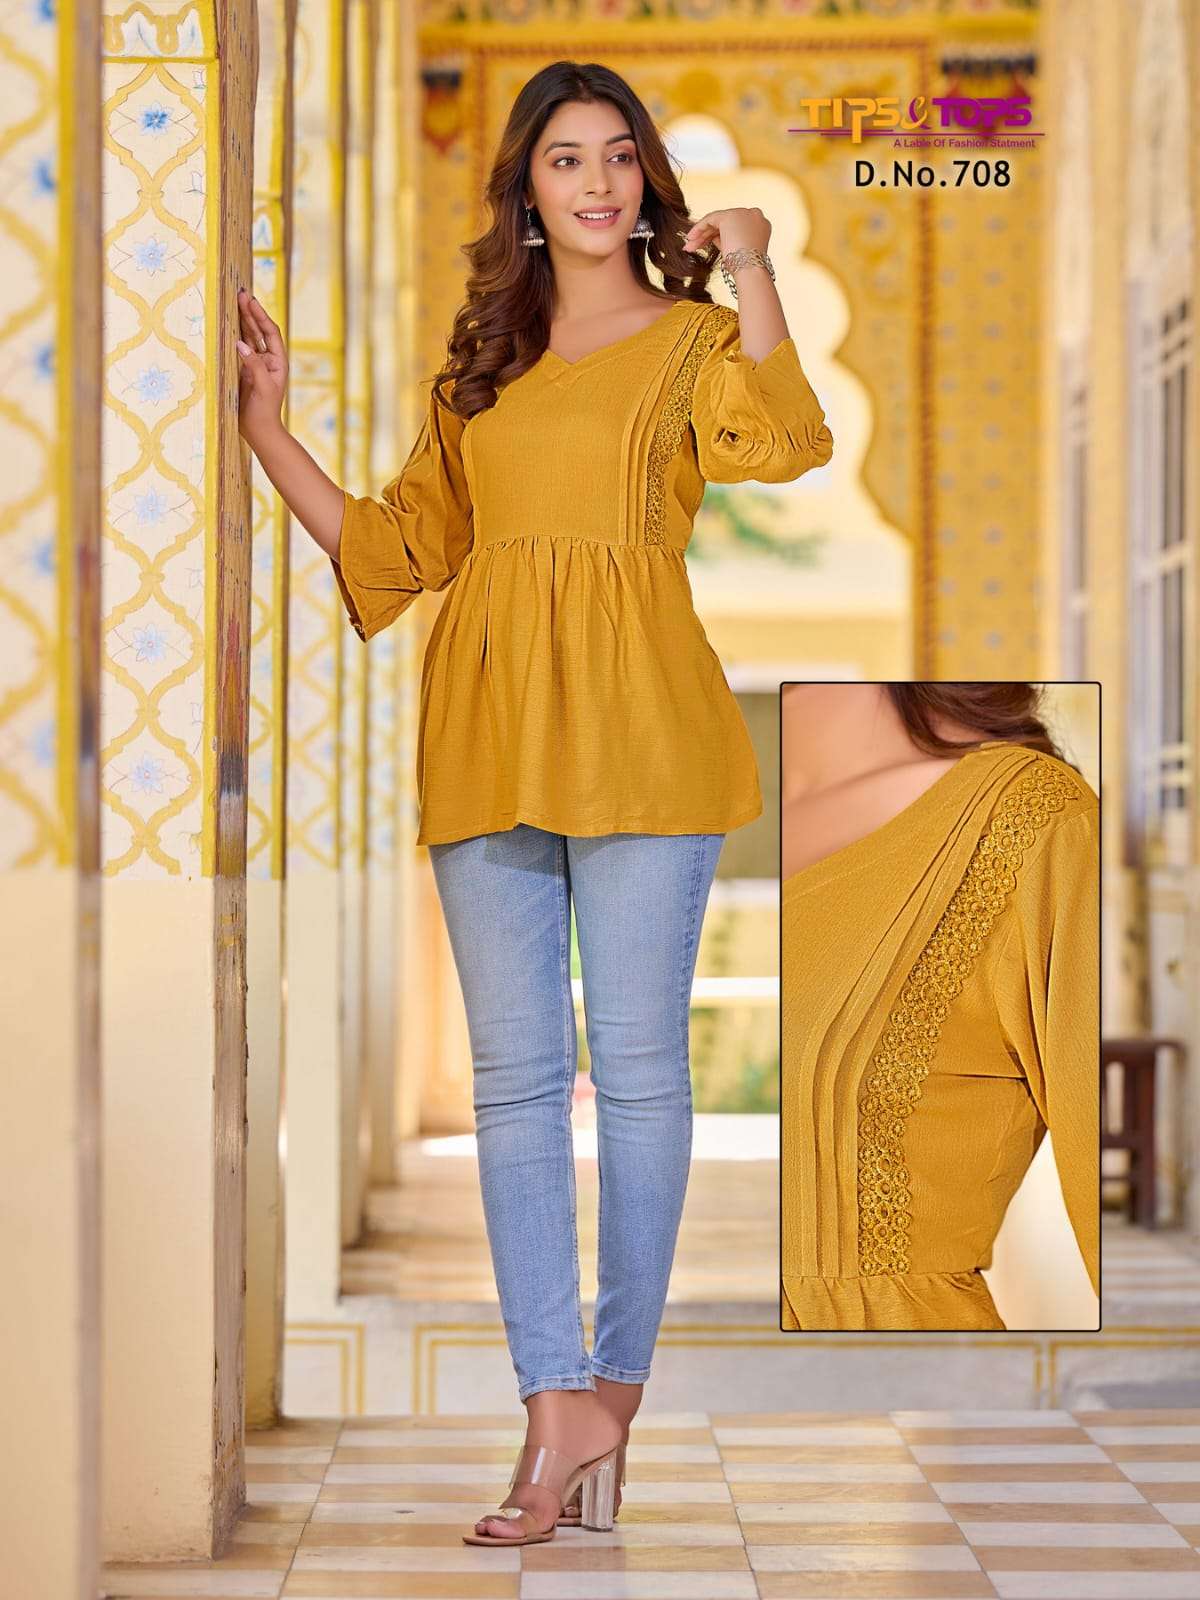 tips and tops pepe tops vol-7 701-708 series stylish look designer short tops catalogue manufacturer surat